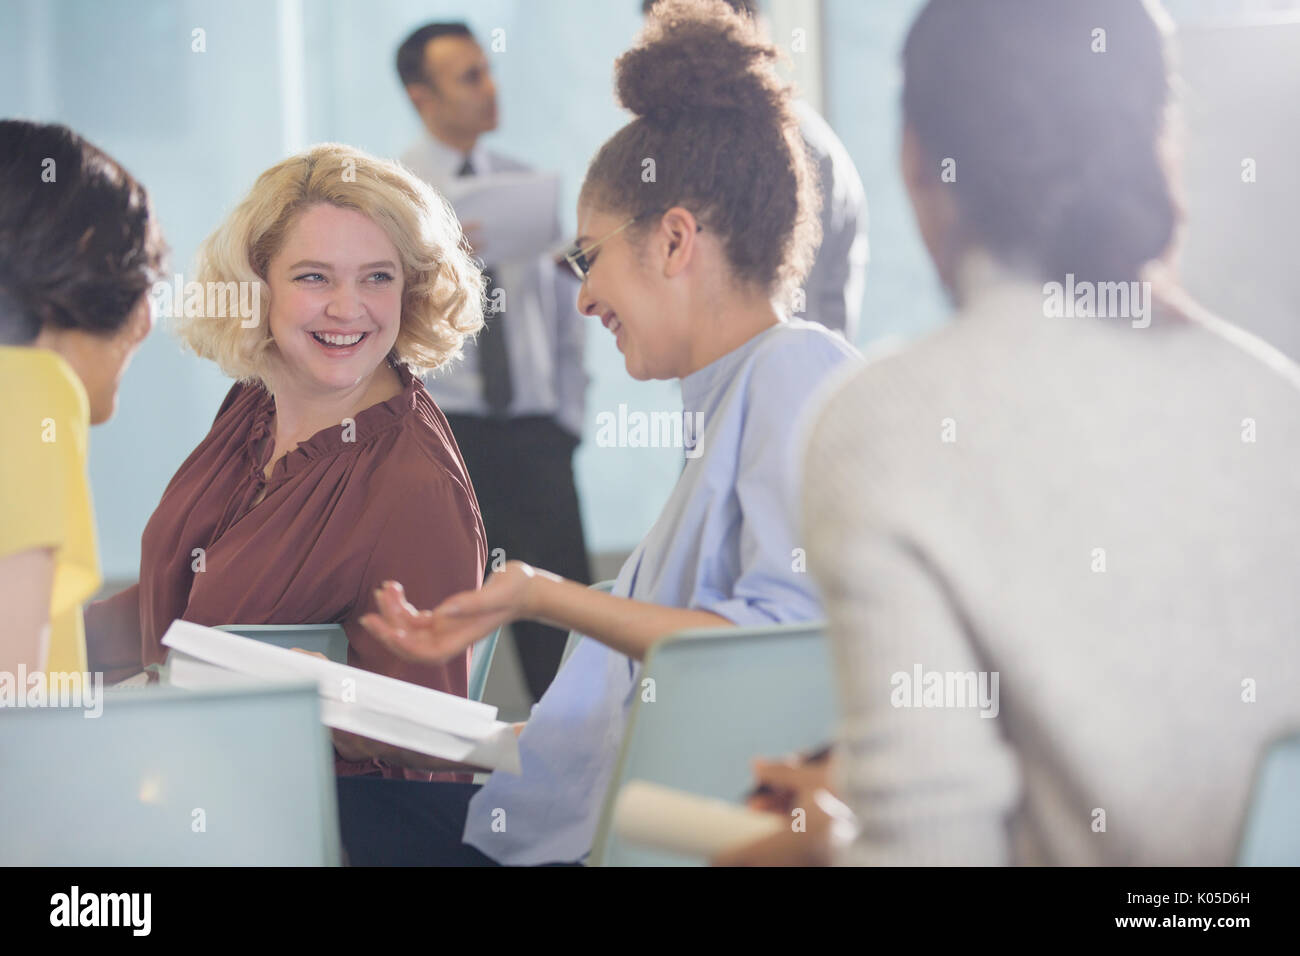 Smiling businesswomen discussing paperwork in conference audience Stock Photo